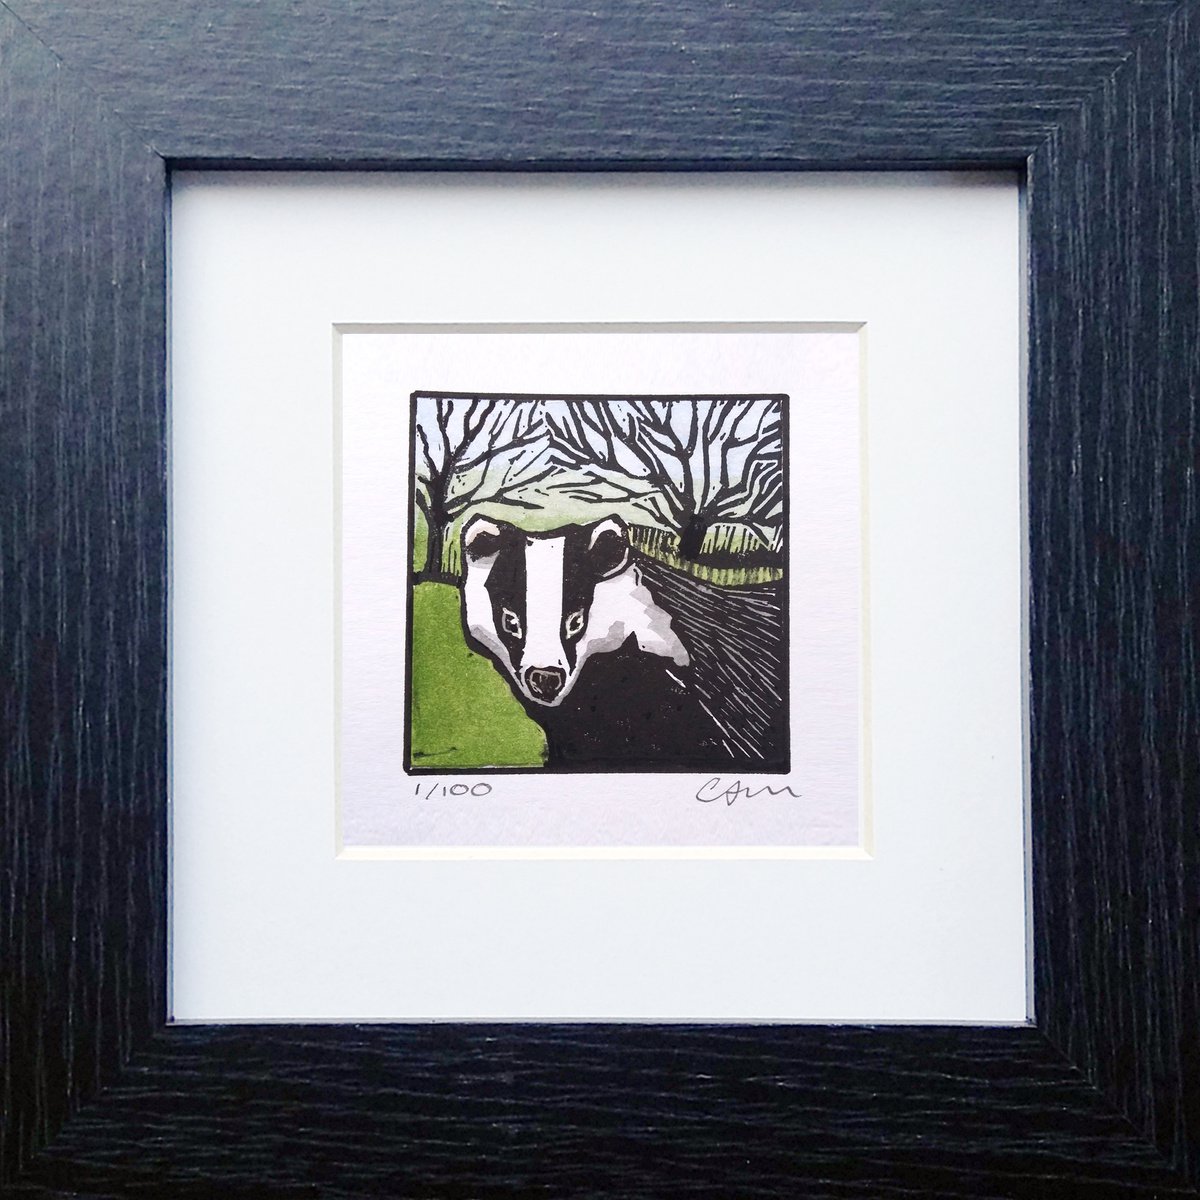 Brock Badger - miniature hand painted linocut print - Framed and ready to hang by Carolynne Coulson